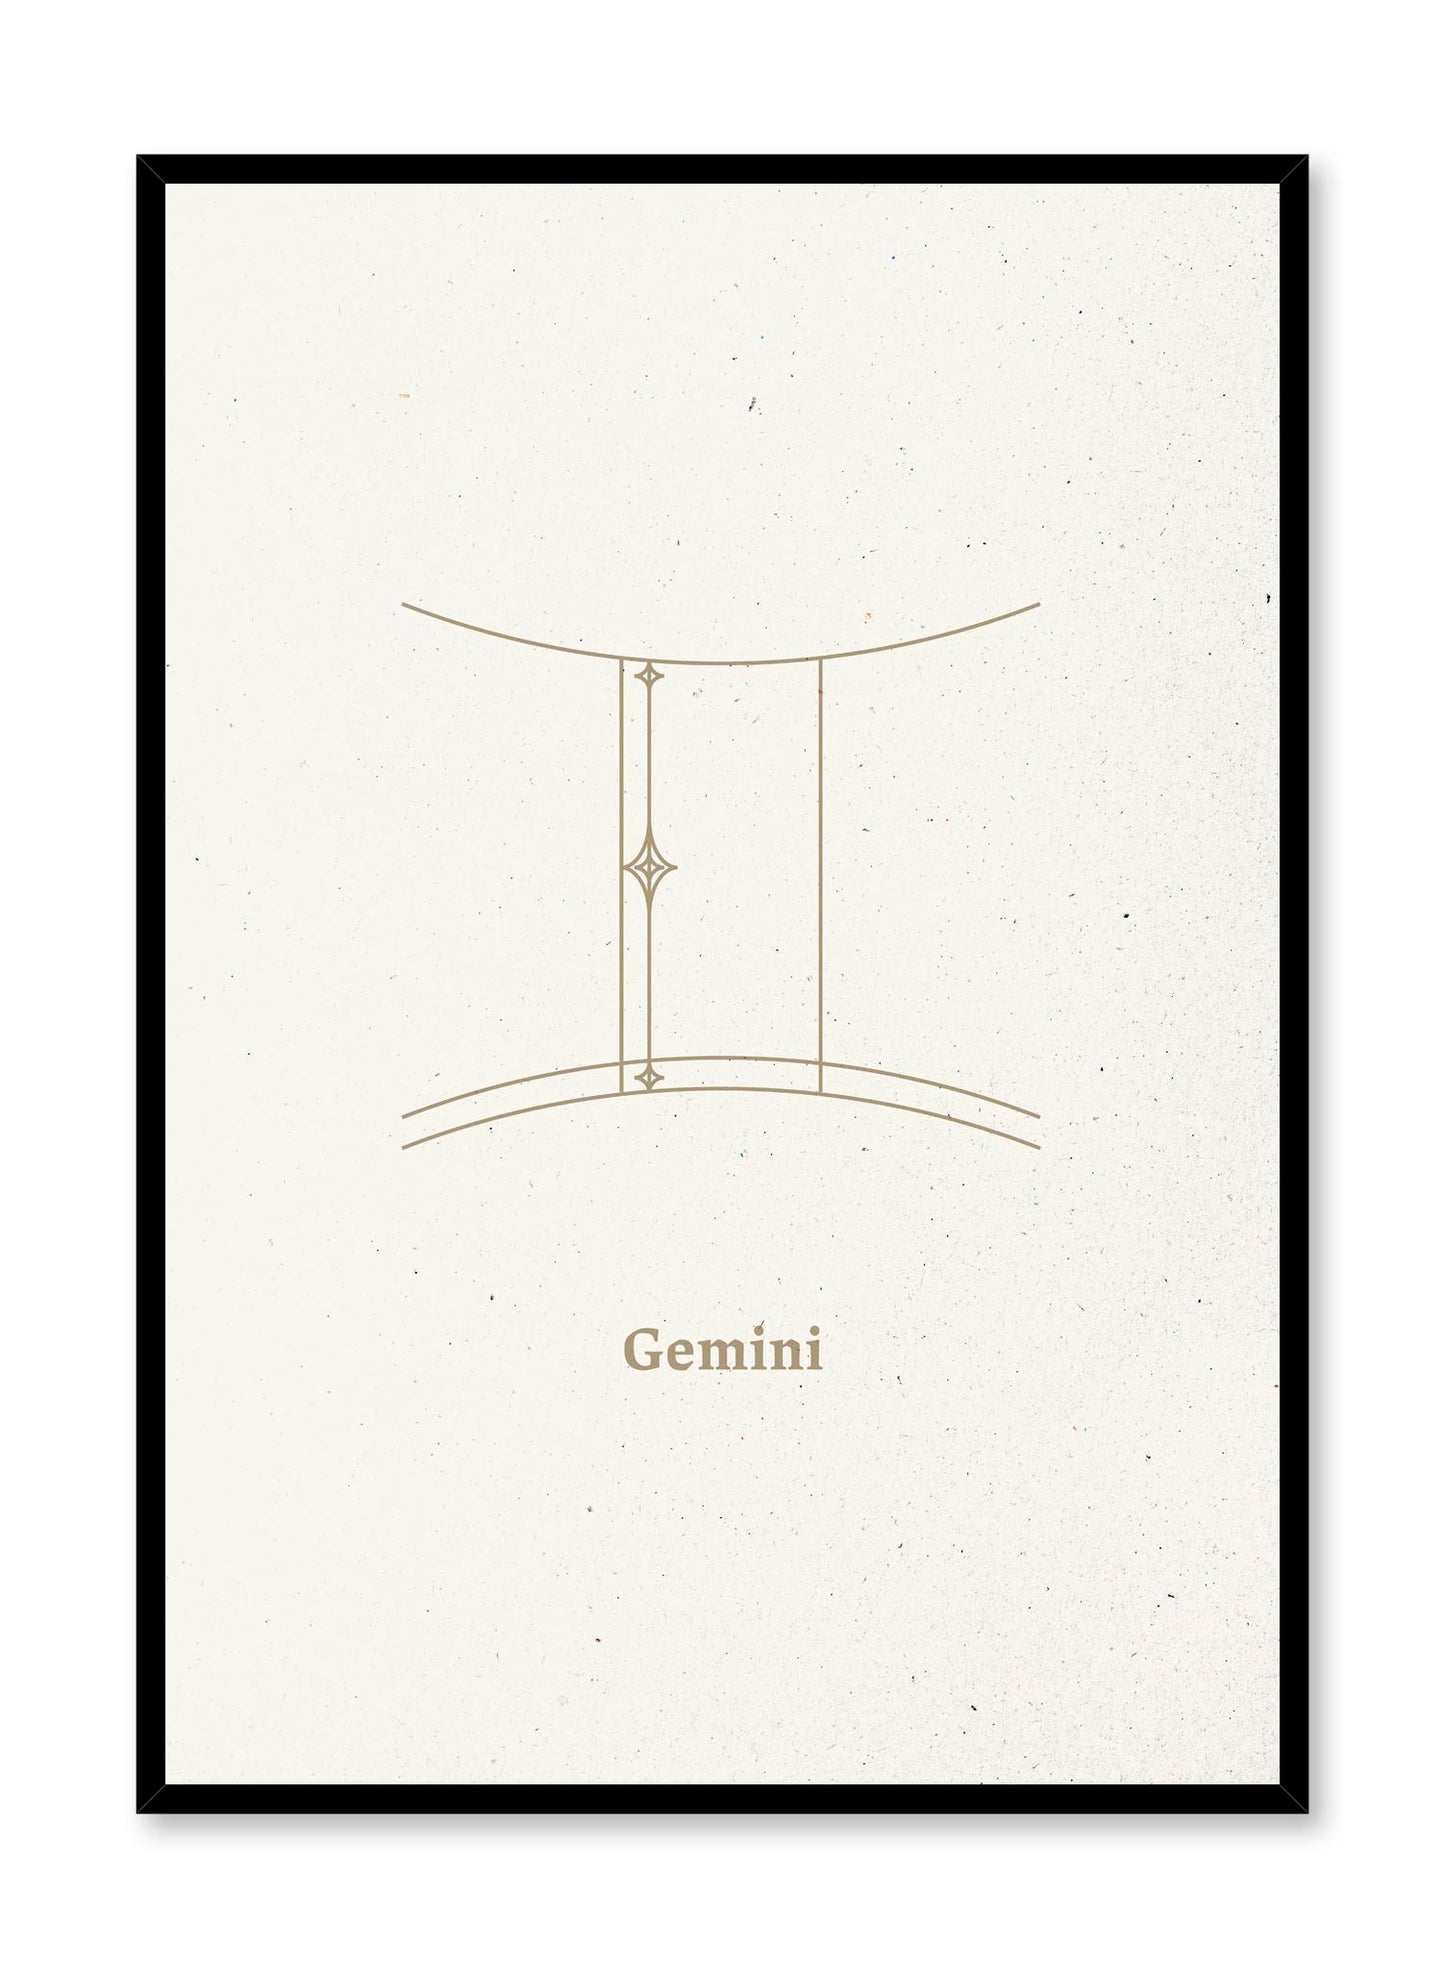 Minimalist celestial illustration poster by Opposite Wall with Gemini symbol